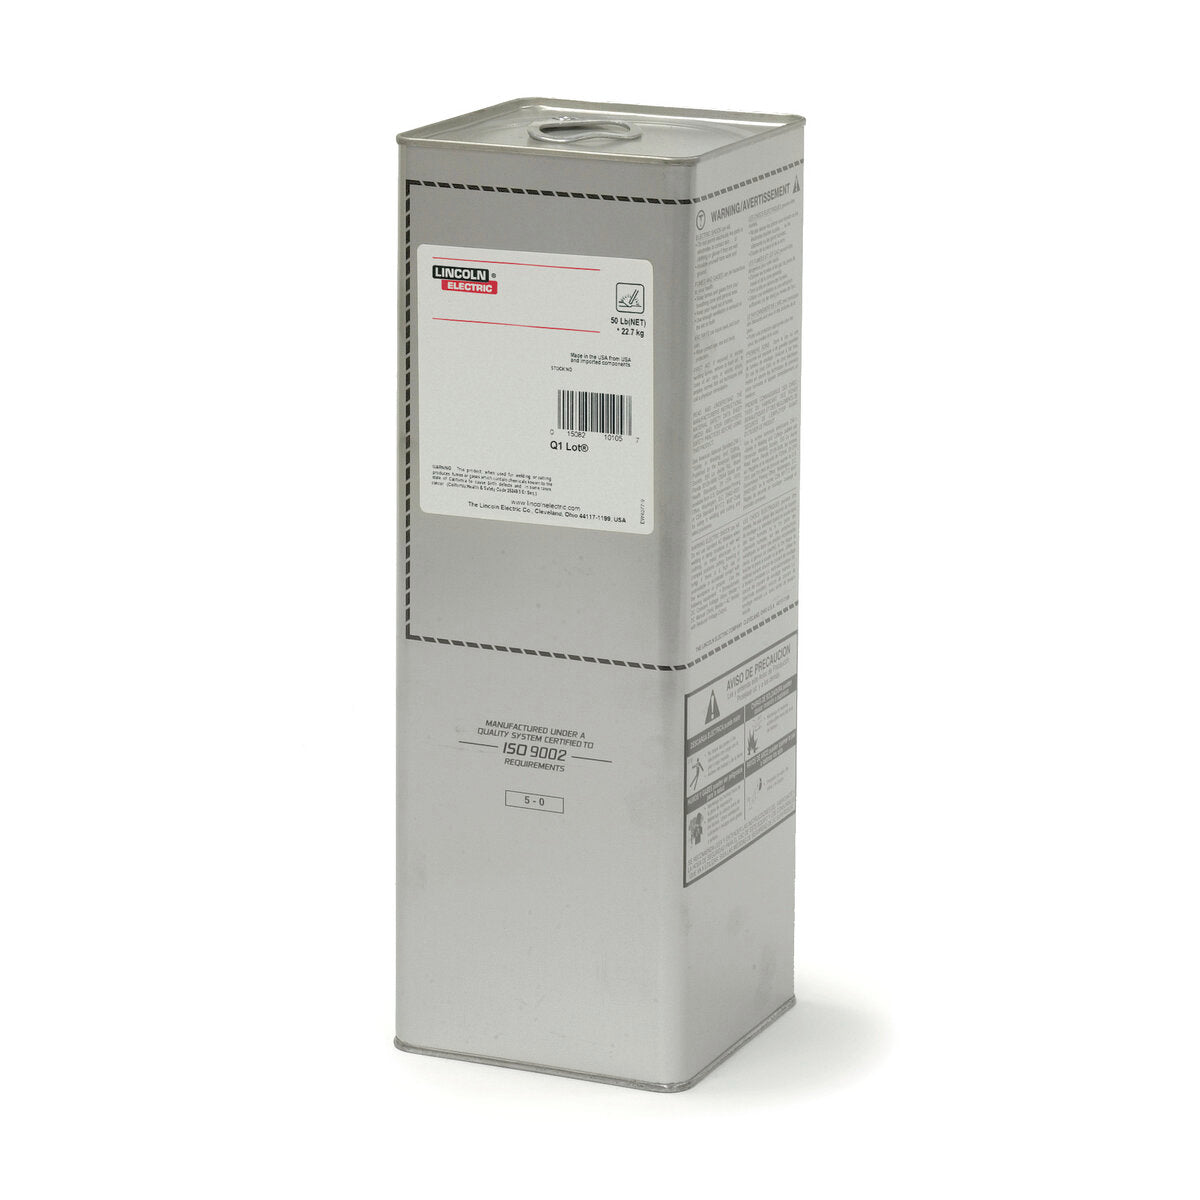 Lincoln Electric - Fleetweld® 37 Stick (SMAW) Electrode, 5/32x14 in, 50 lb Easy Open Can - ED010165